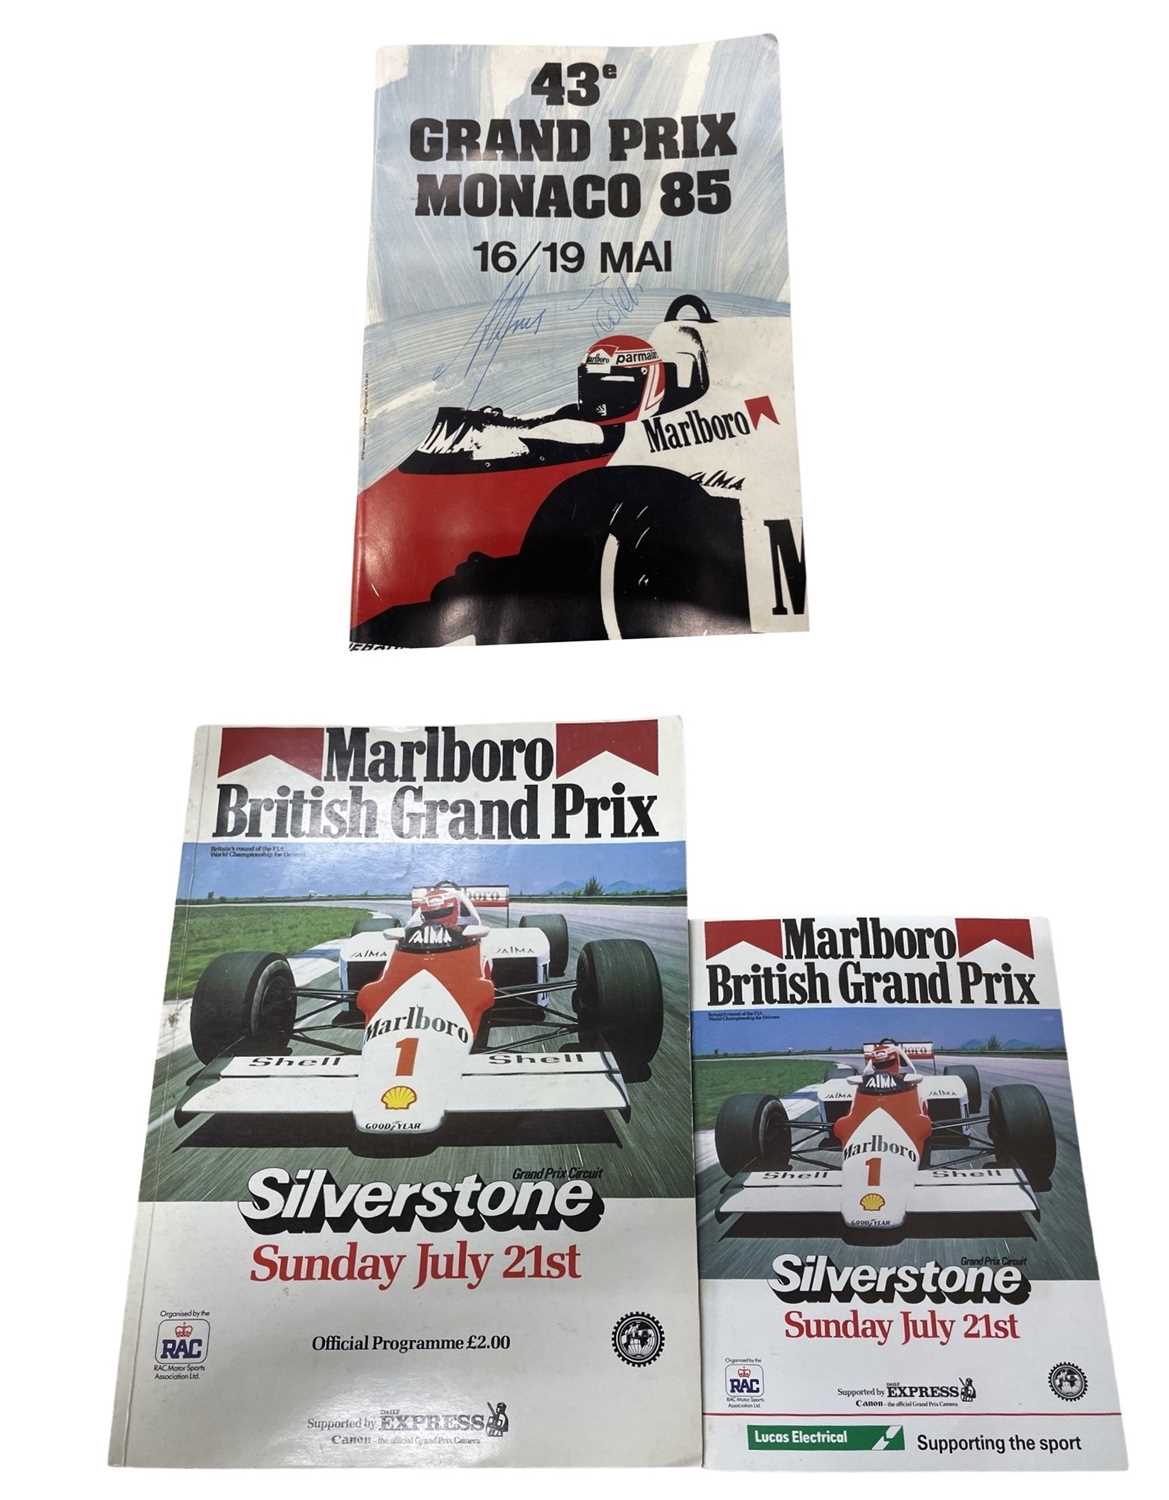 A Monaco 1985 Grand Prix programme, together with a British Grand Prix programme, both signed by